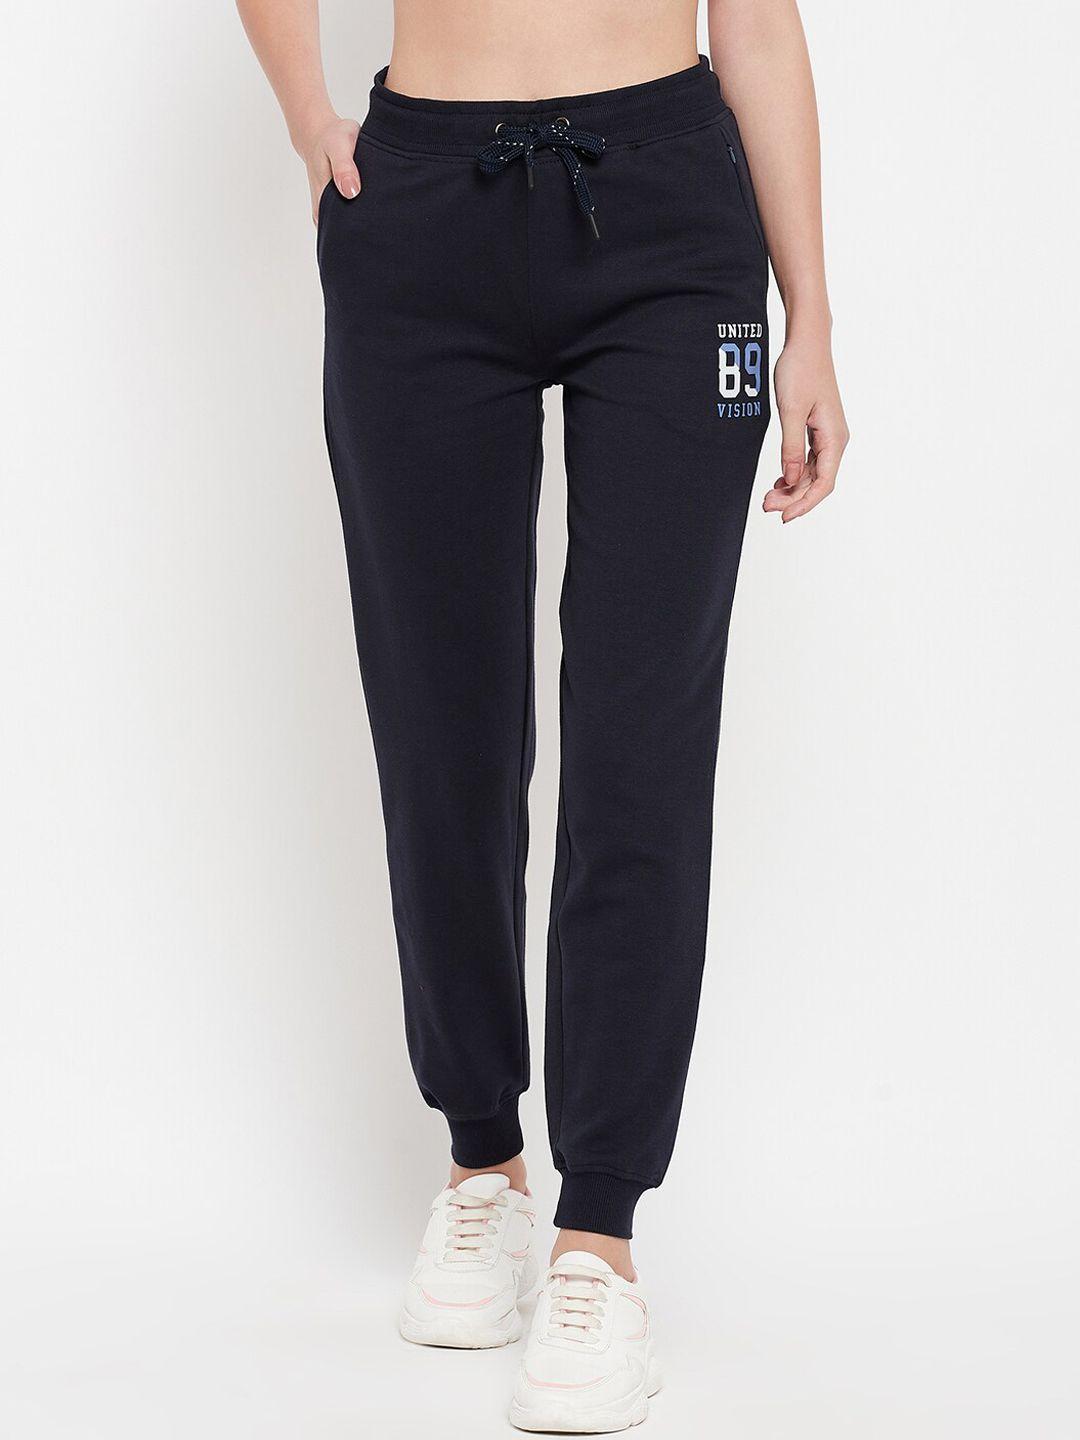 cantabil-women-typography-printed-mid-rise-joggers